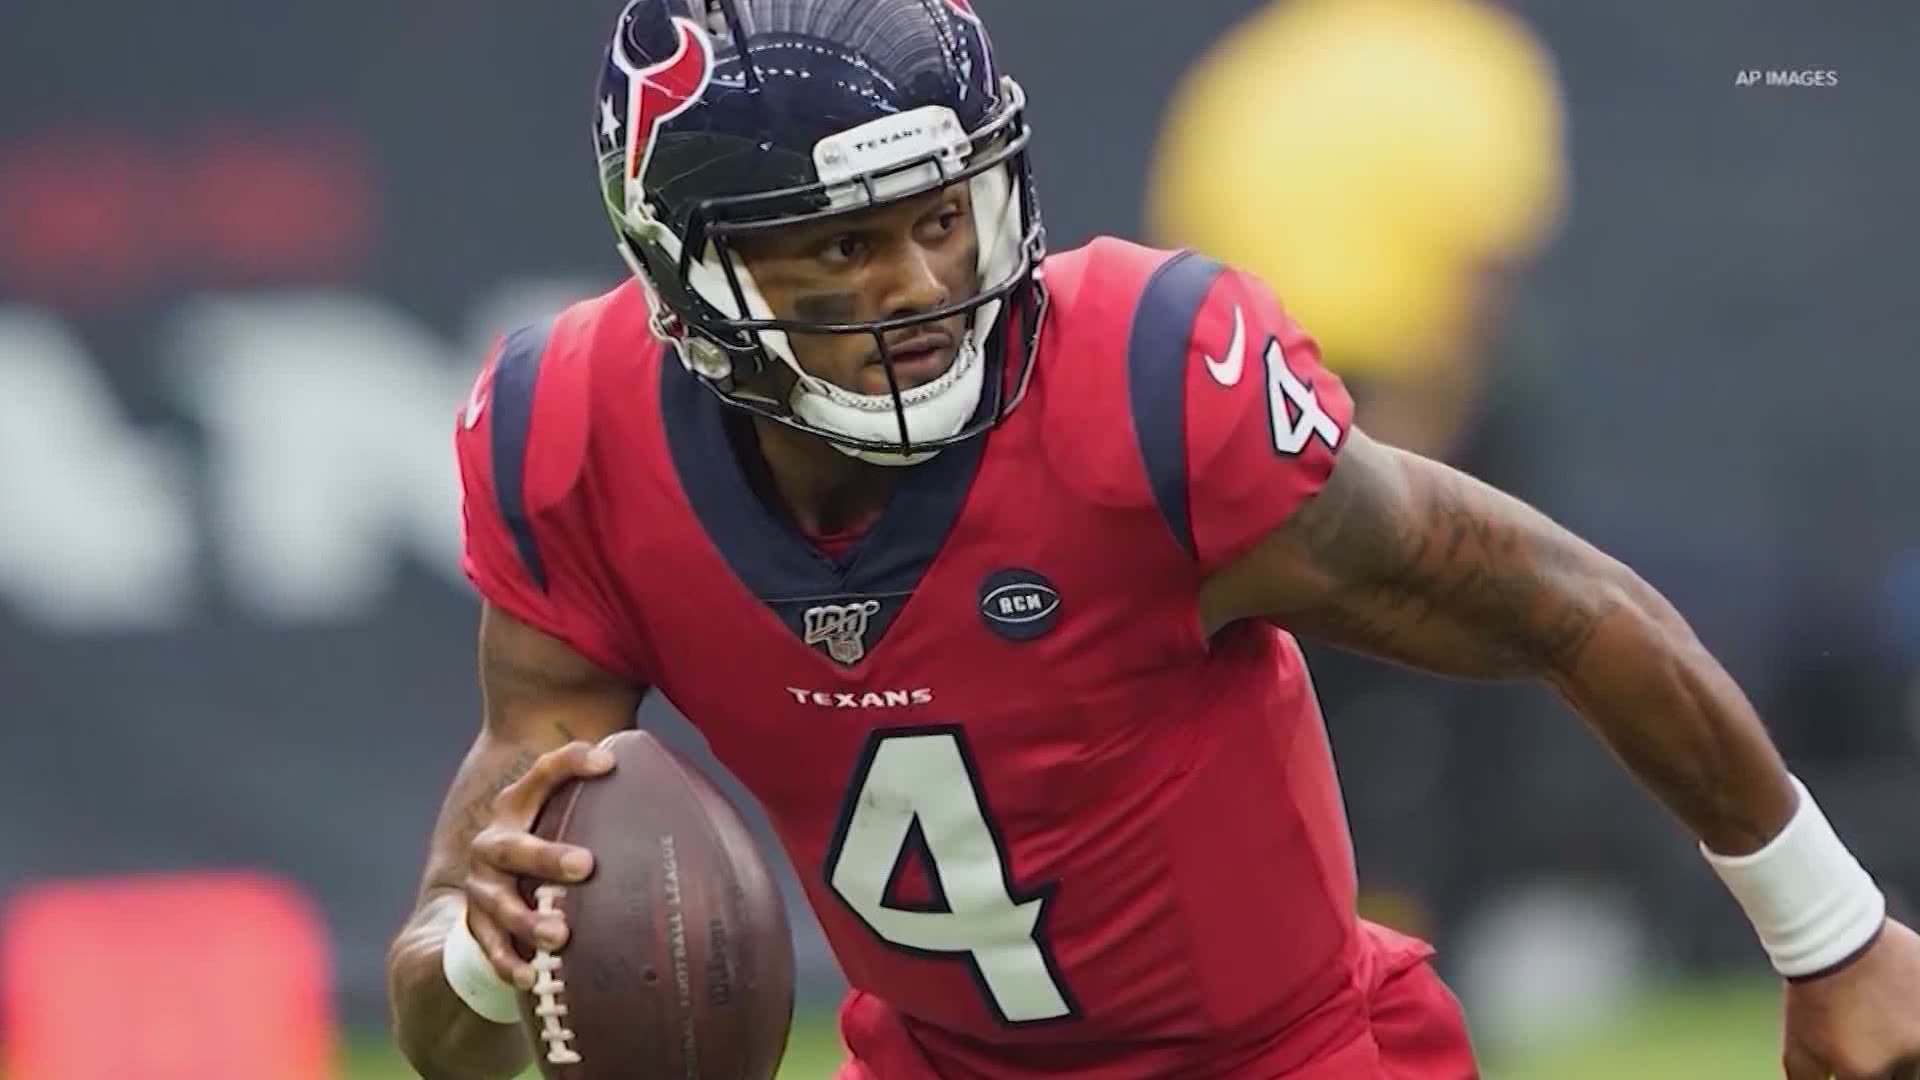 A complaint against Deshaun Watson has been filed with the Houston Police Department and they've launched an investigation.